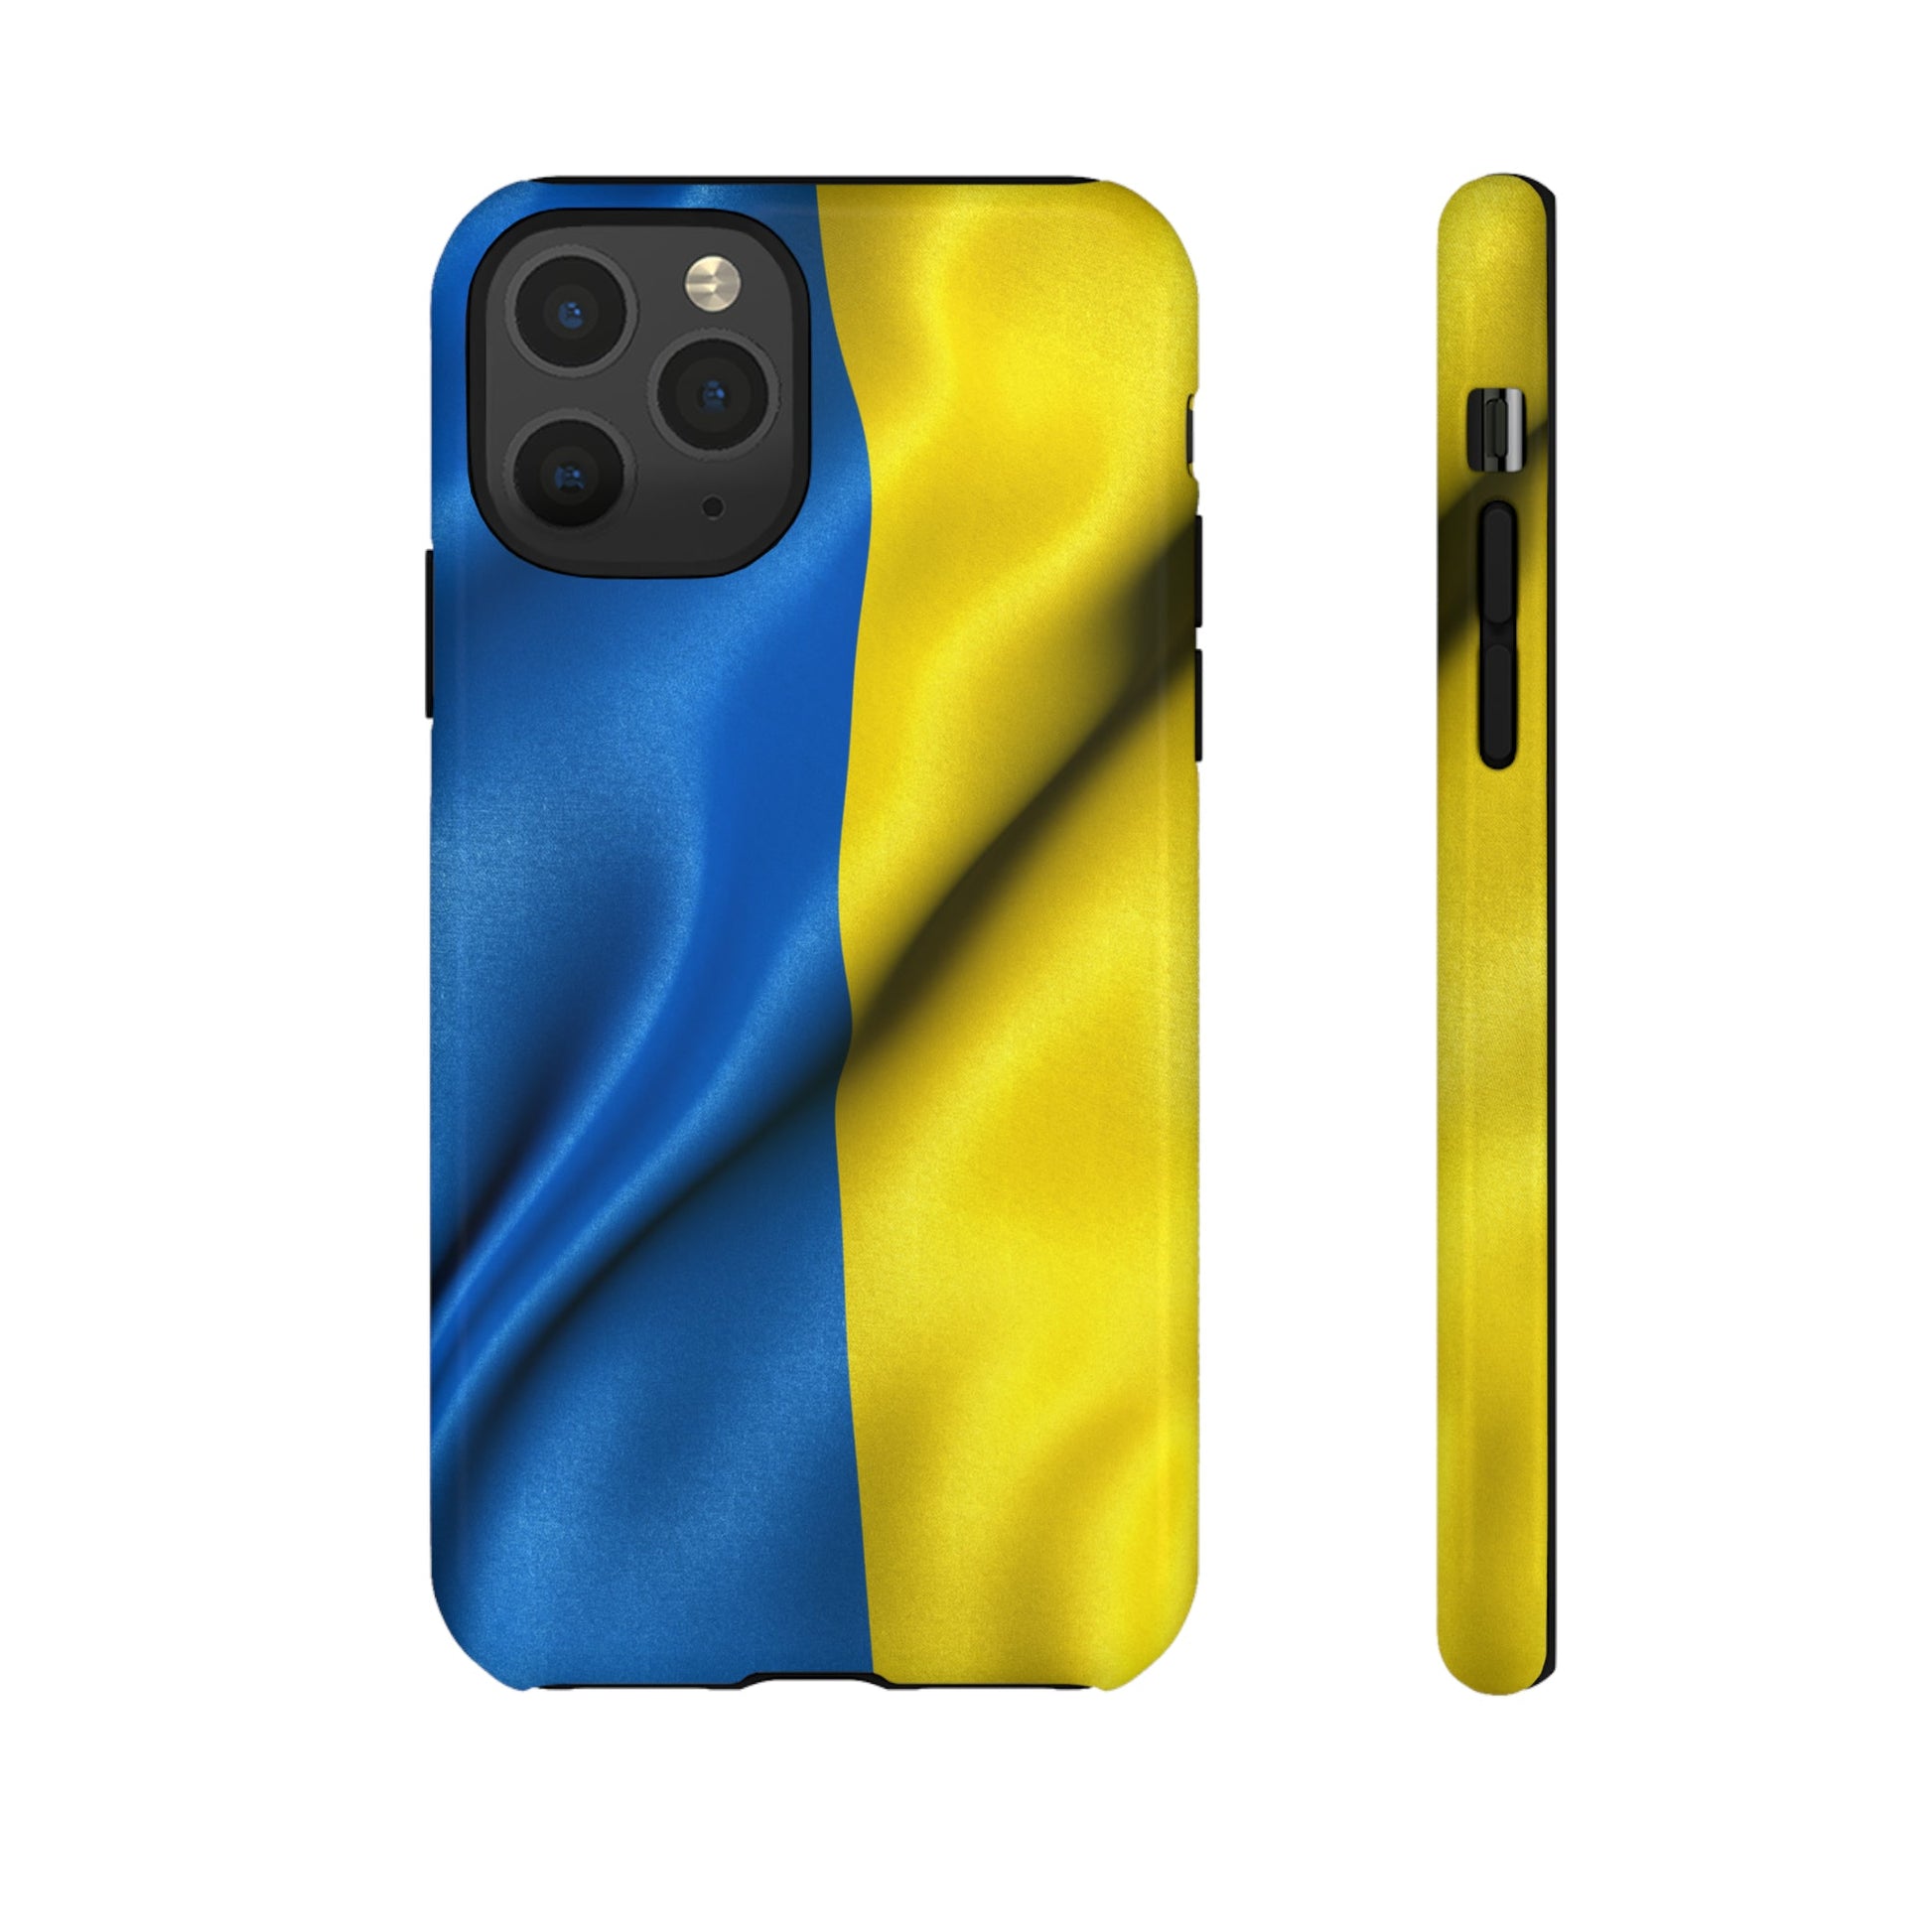 Phone Case - I Stand With Ukraine IPhone , Samsung Tough Cases